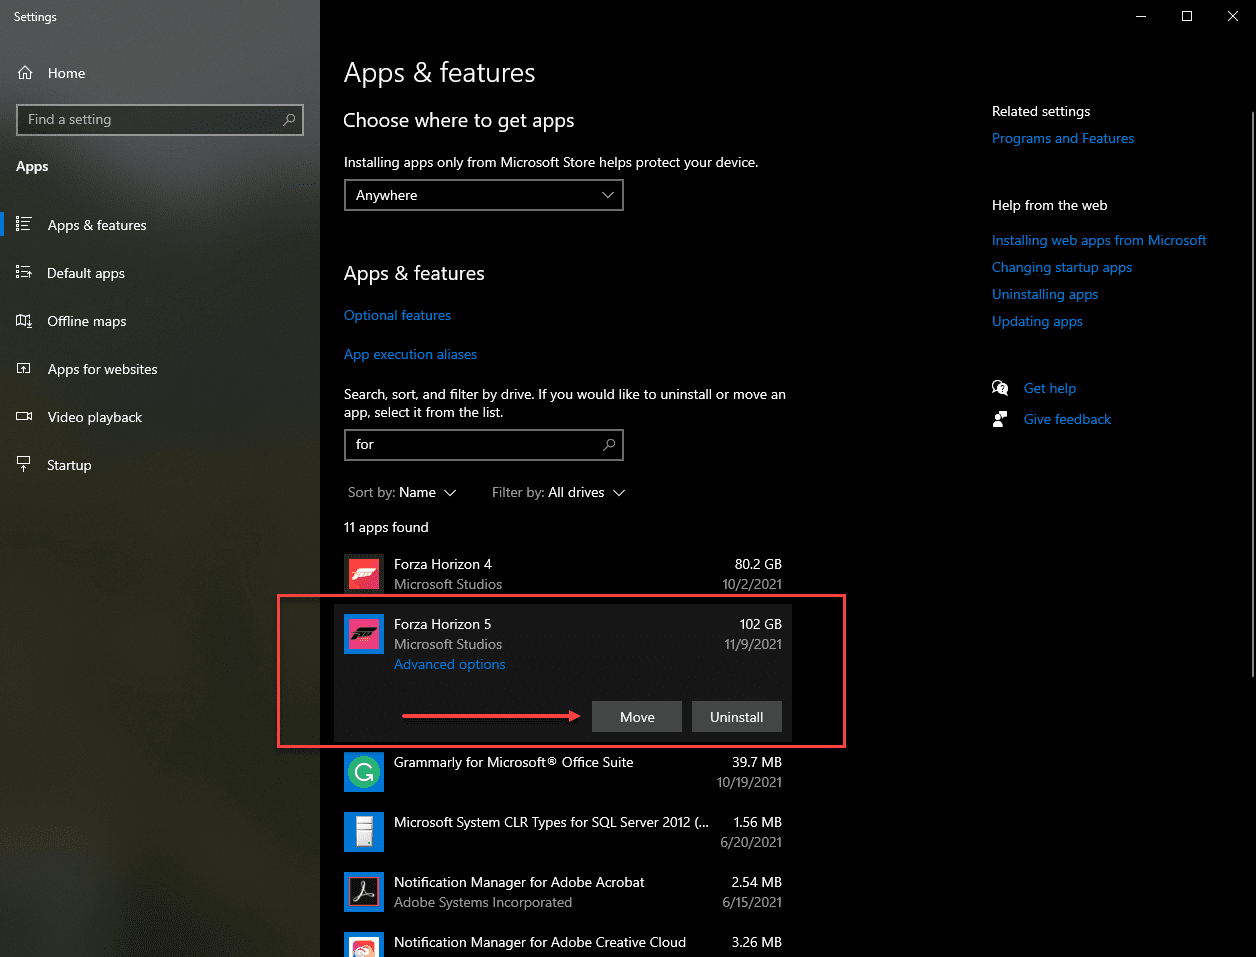 Moving Forza Horizon 5 in the apps settings